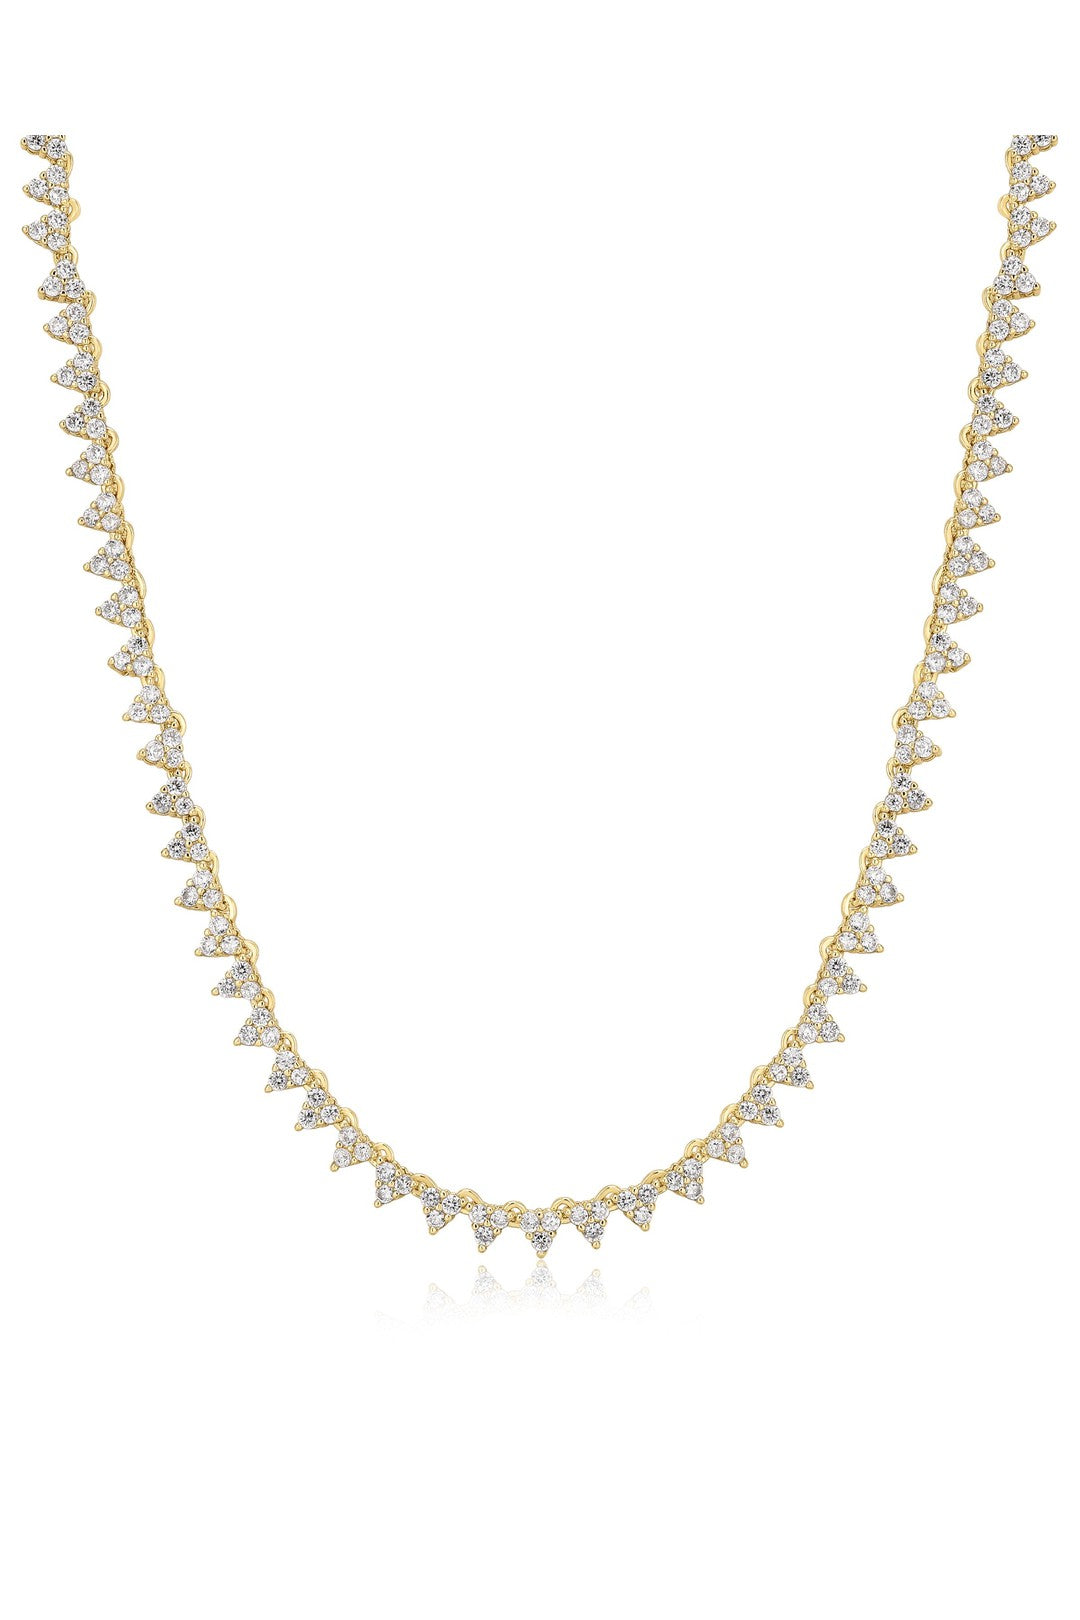 The Isabelle stud tennis necklace, gold